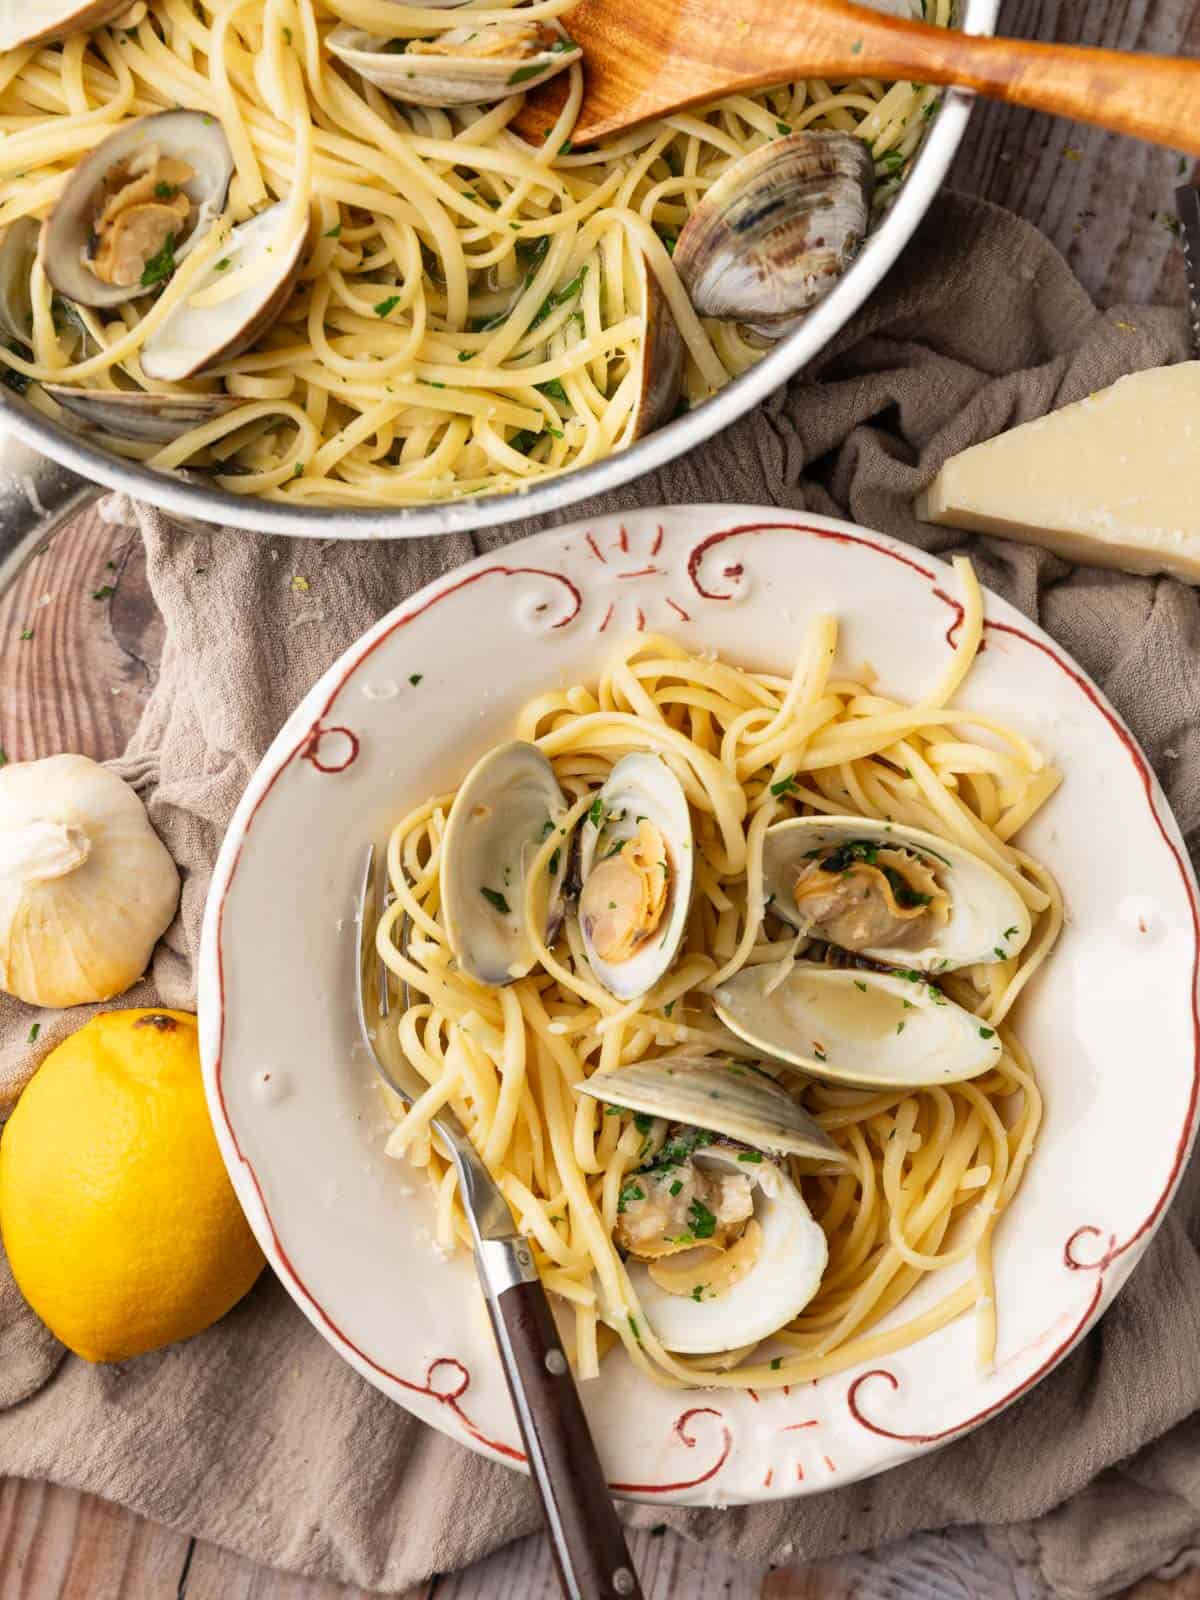 pan and bowl of linguine pasta with clams with garlic, parmesan and lemon next to it.